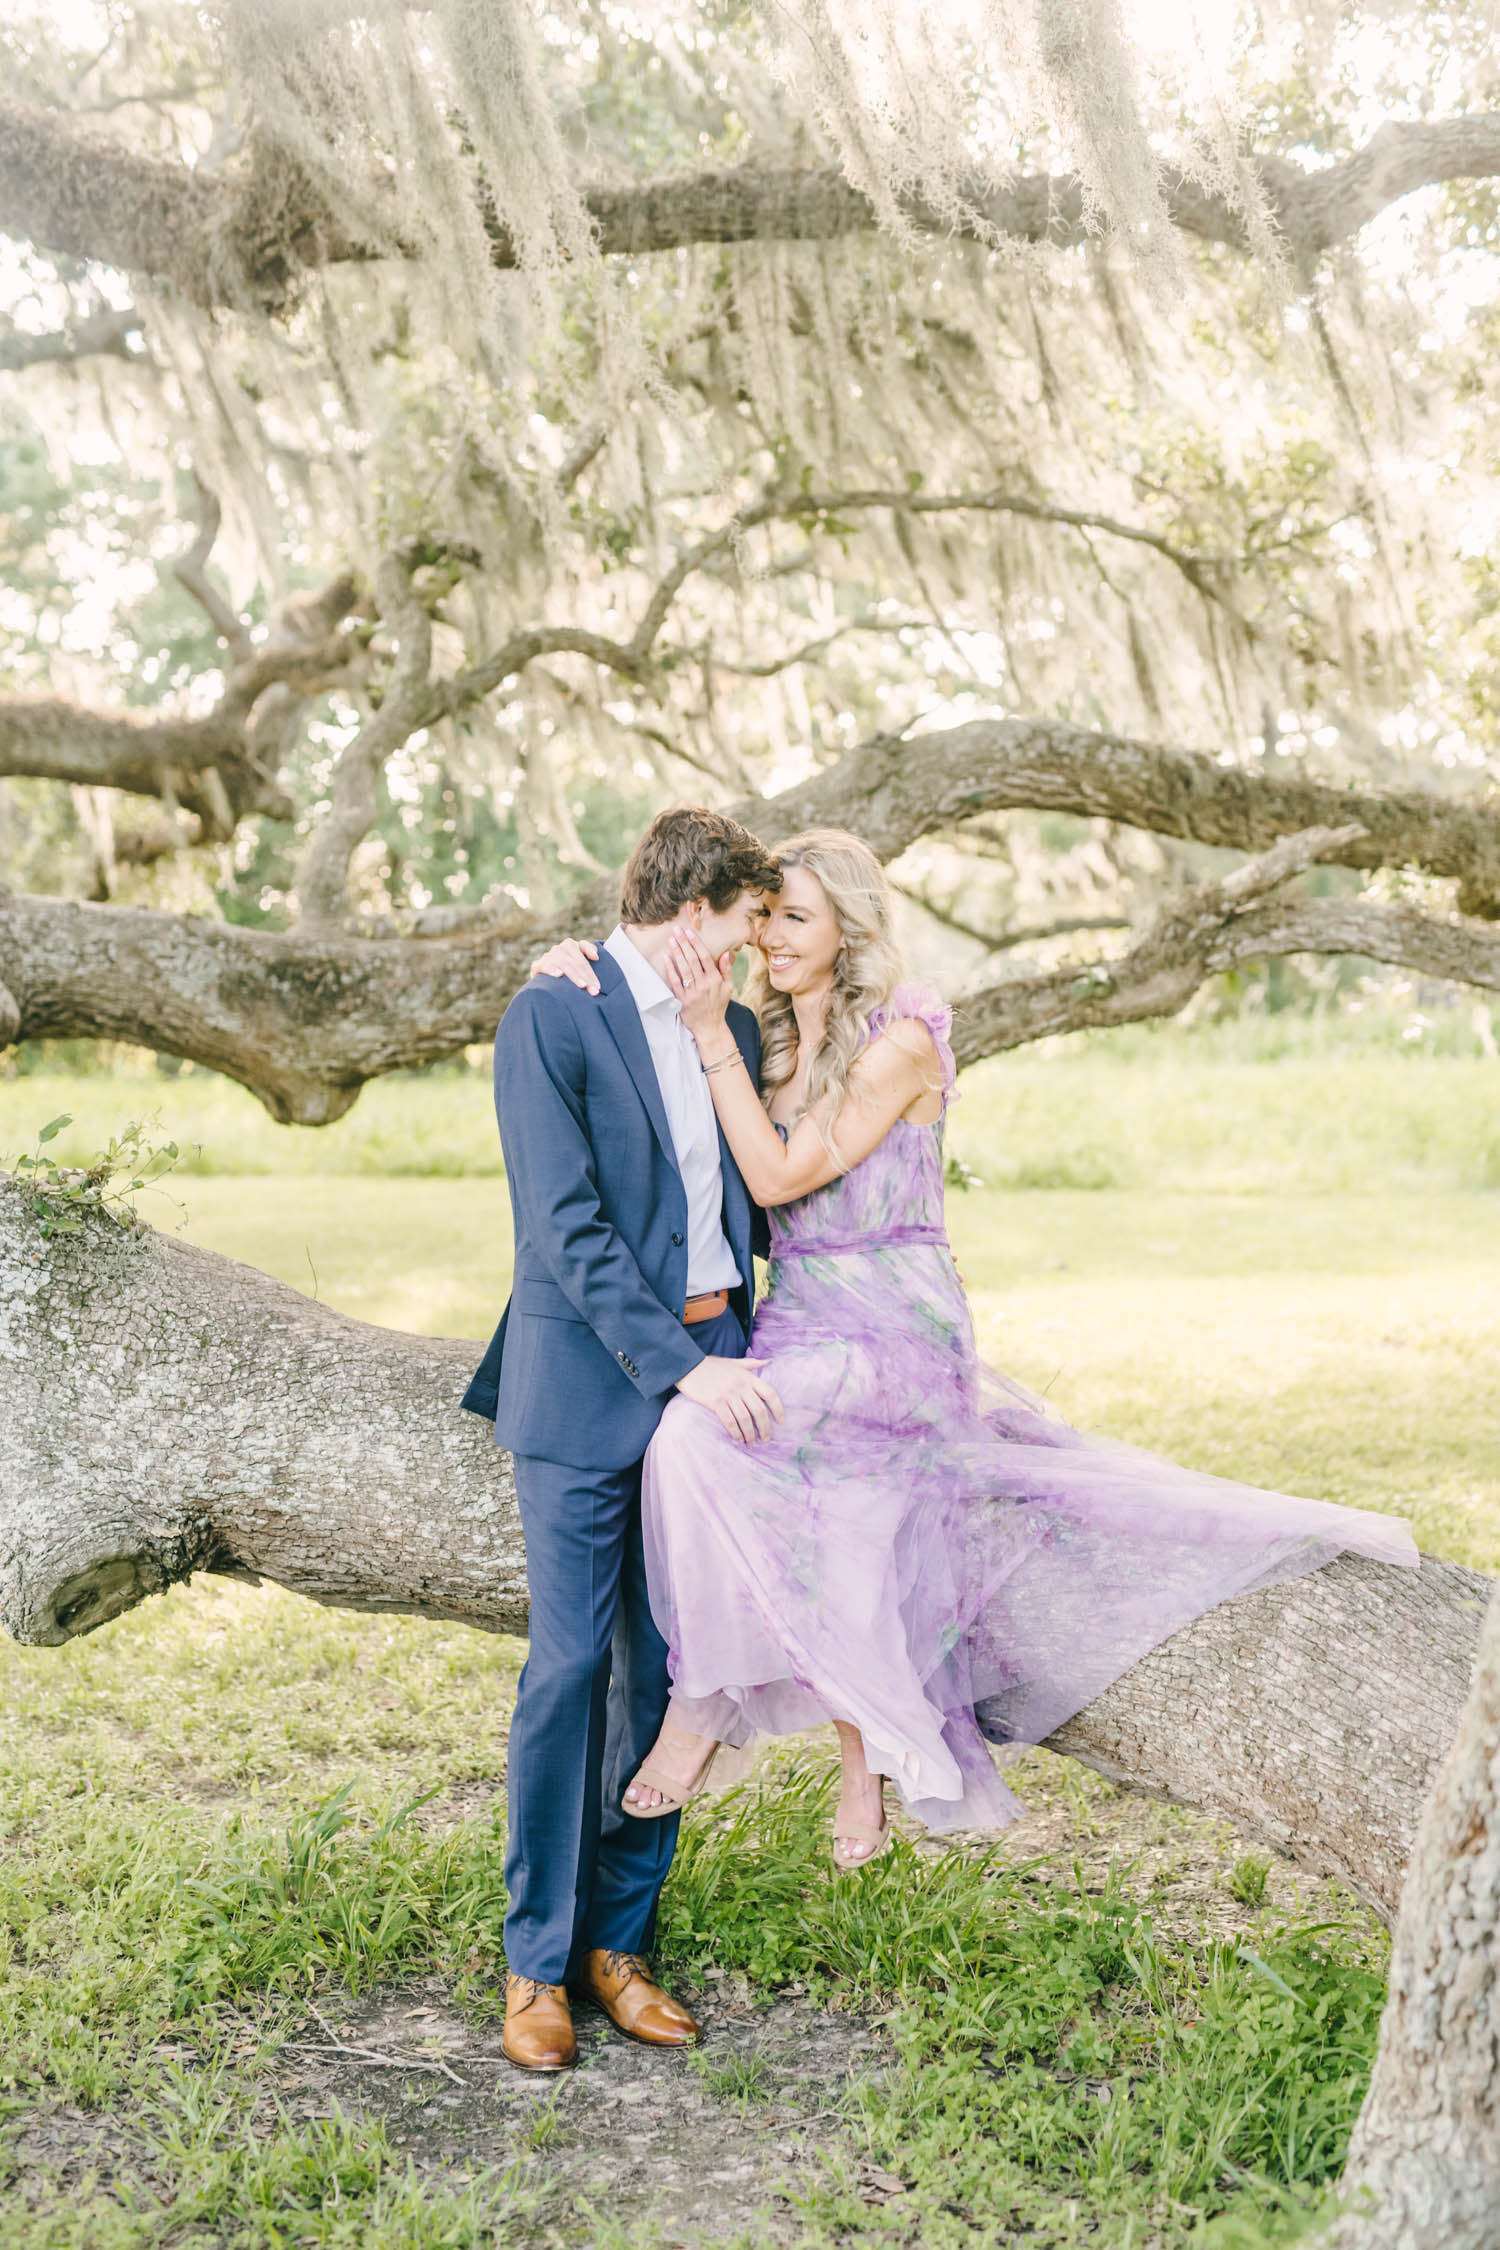 In Houston, Texas a darling couple goes in for a kiss as a woman sits on a tree branch and holds her fiance's jaw by Christina Elliott Photography. fiance photography wedding announcement pictures darling couple in love #christinaelliottphotography #christinaelliottengagements #houstonengagements #brazosbendstateparkengagements #brazosbendphotography #houstonengagementphotographer #weddingannoucementphotos #houstonphotographers #couplegoals #soontobemarried #engaged #engagementphotos